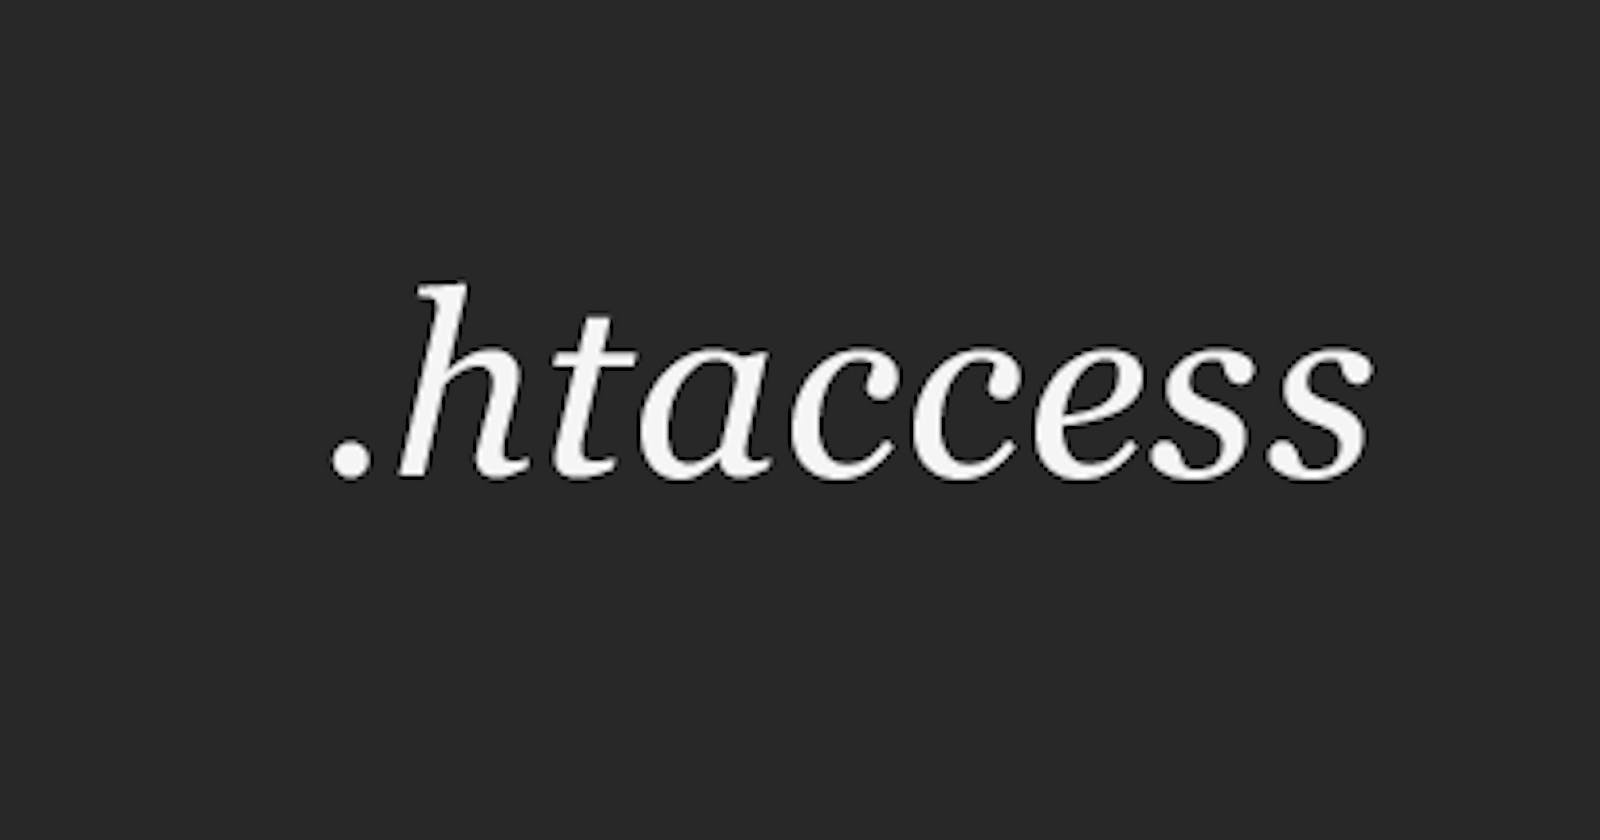 How to Password Protect a Website or Web SubDirectory With .htaccess & .htpasswd